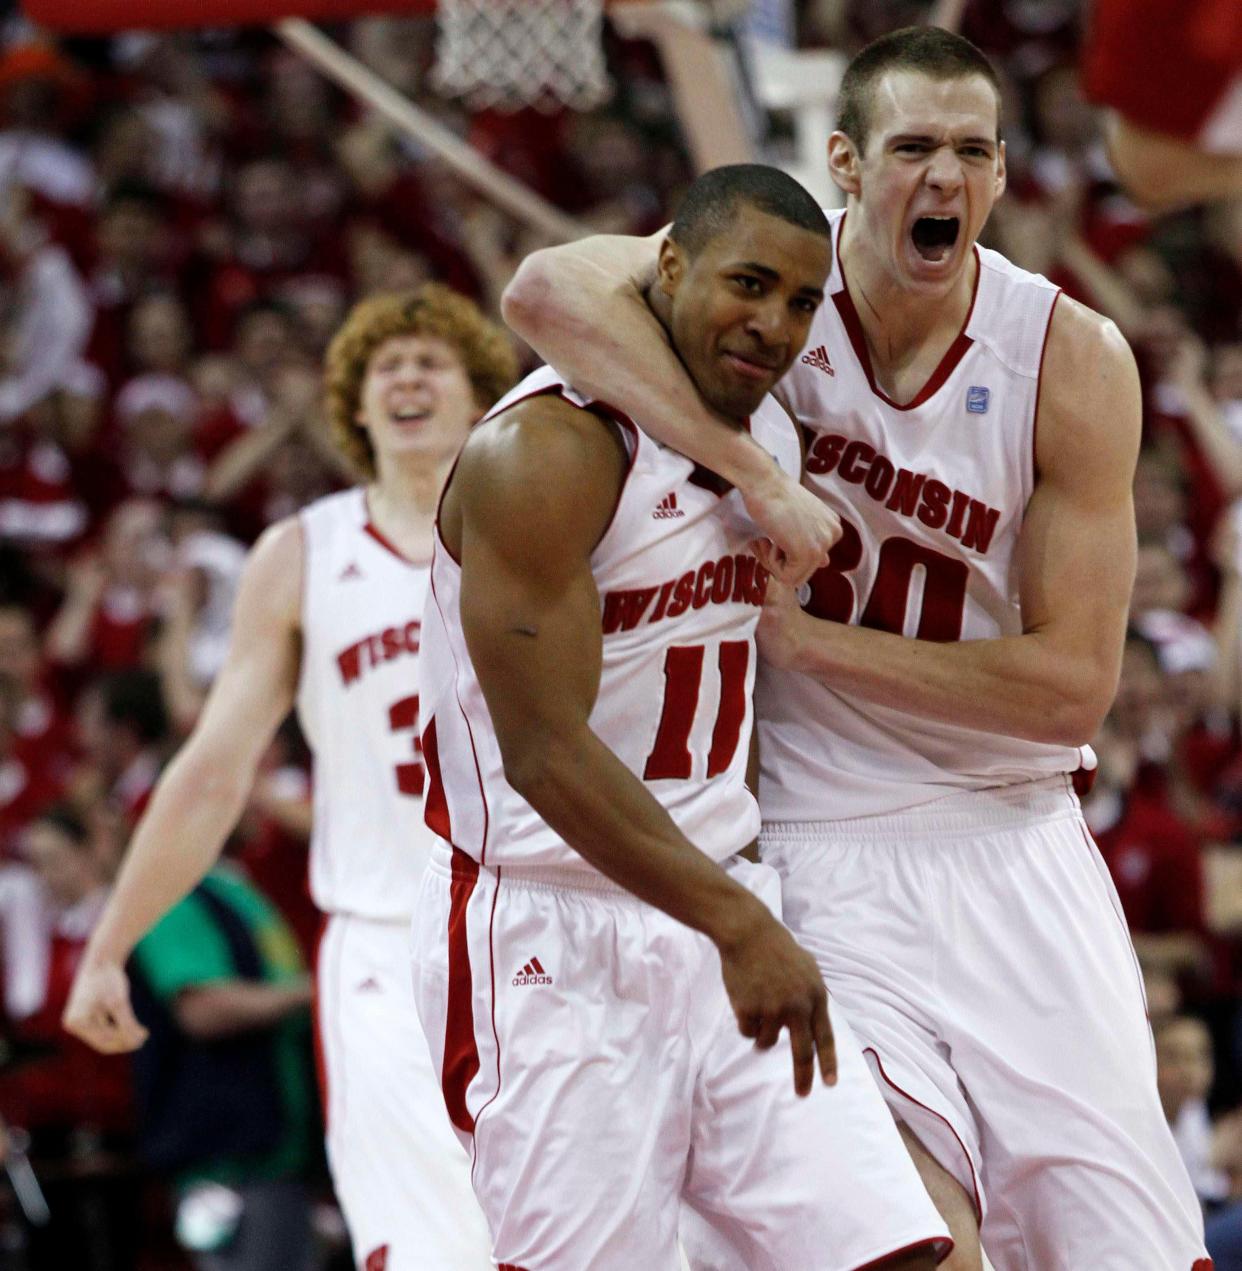 Wisconsin Badgers' Jordan Taylor (11) is hugged by teammate Jon Leuer (30) after making a basket against Ohio State Buckeyes late in the second half of their NCAA basketball game in Madison, Wisconsin February 12, 2011. Wisconsin went on to beat undefeated Ohio State 71-67.